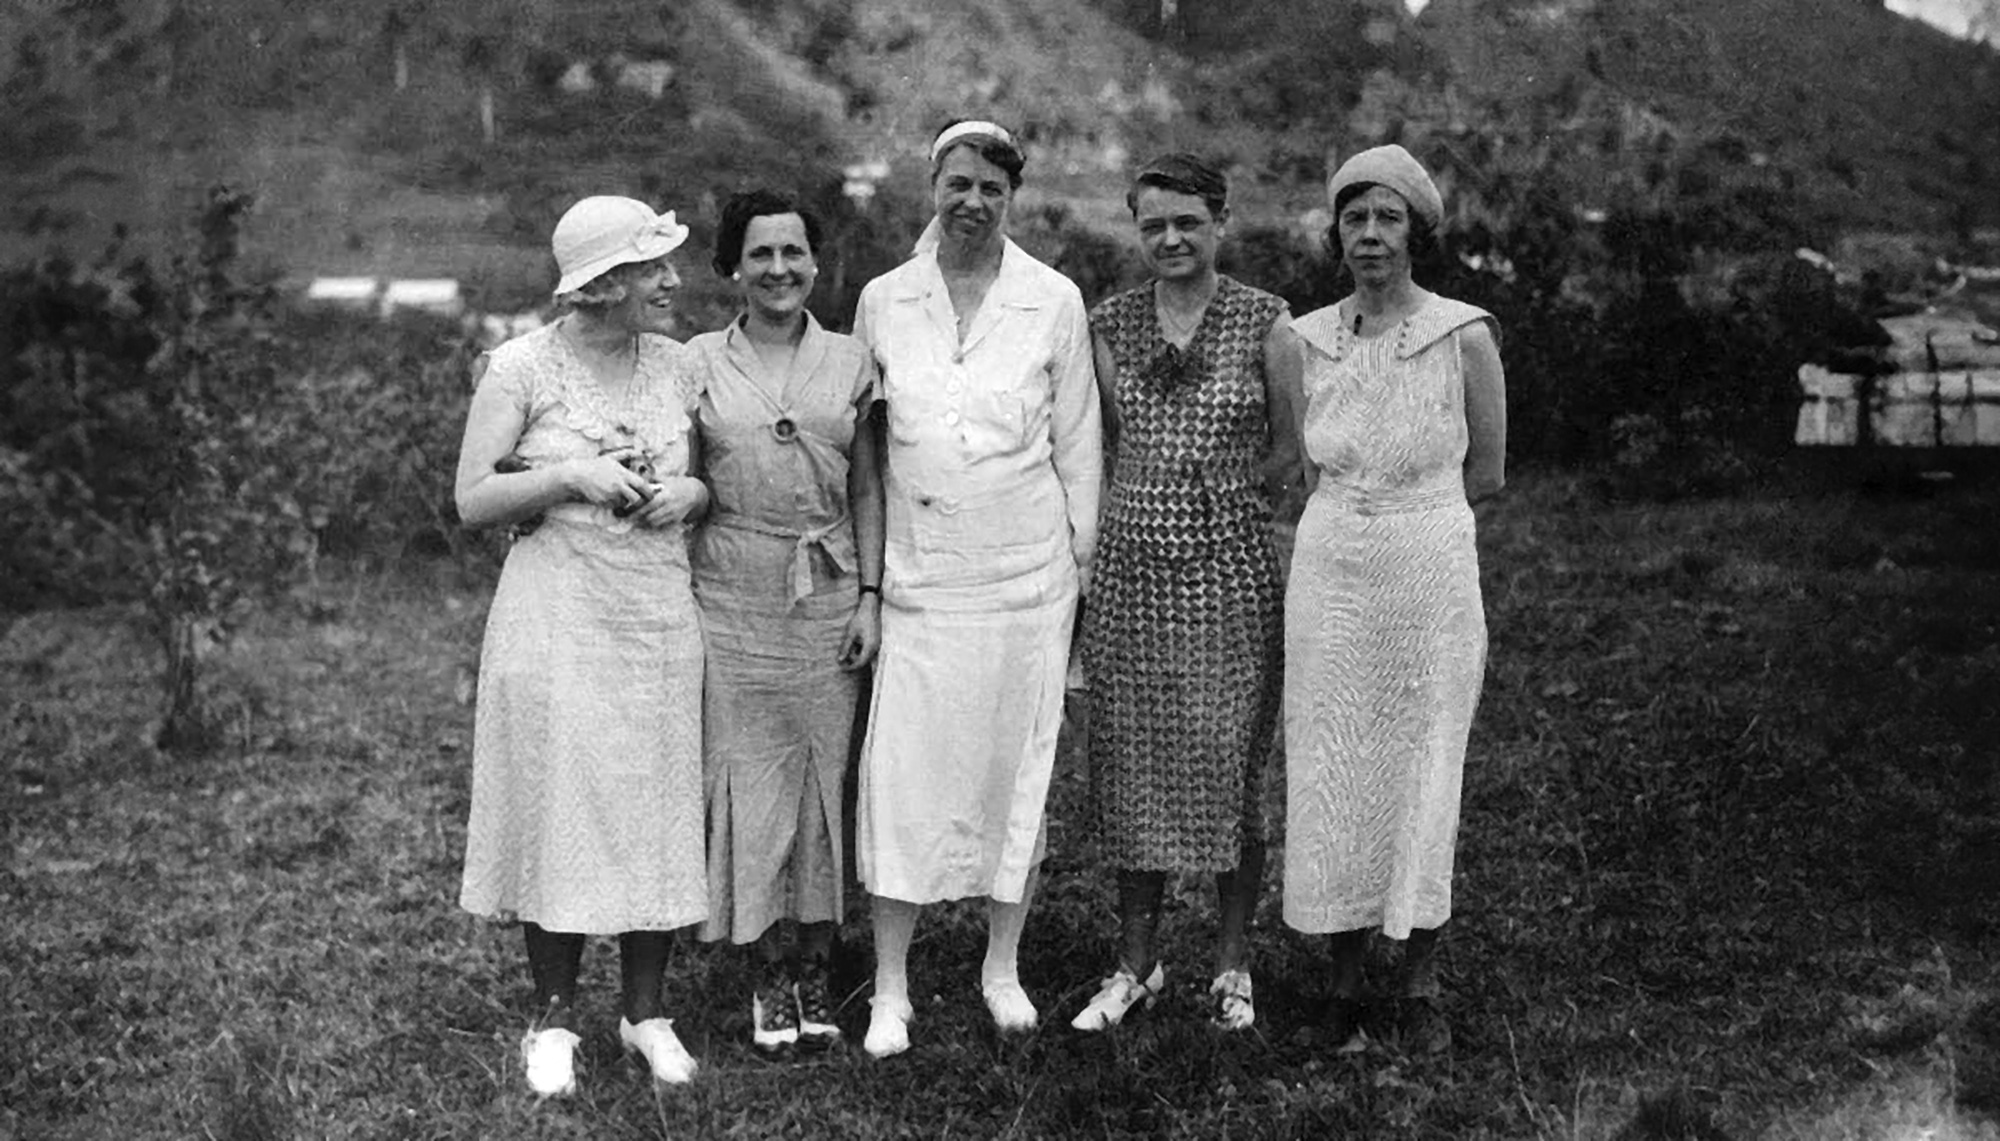 Bess Furman Armstrong, right, is pictured with First Lady Eleanor Roosevelt, center, and fellow reporters during a 1934 trip to Puerto Rico. (National Archives)